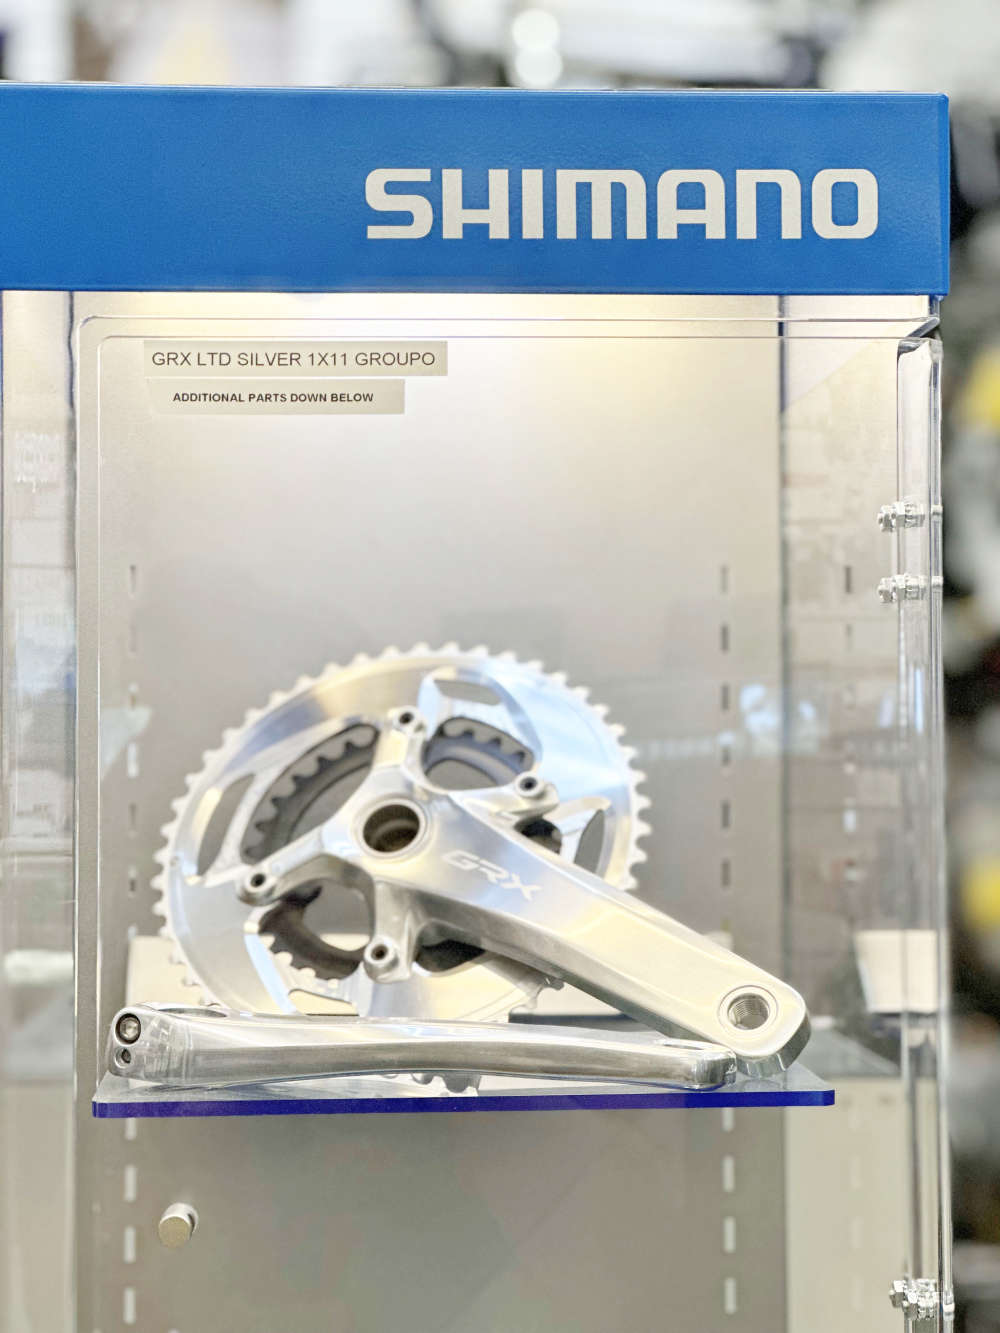 A GRX Crank on display in a Shimano parts case.